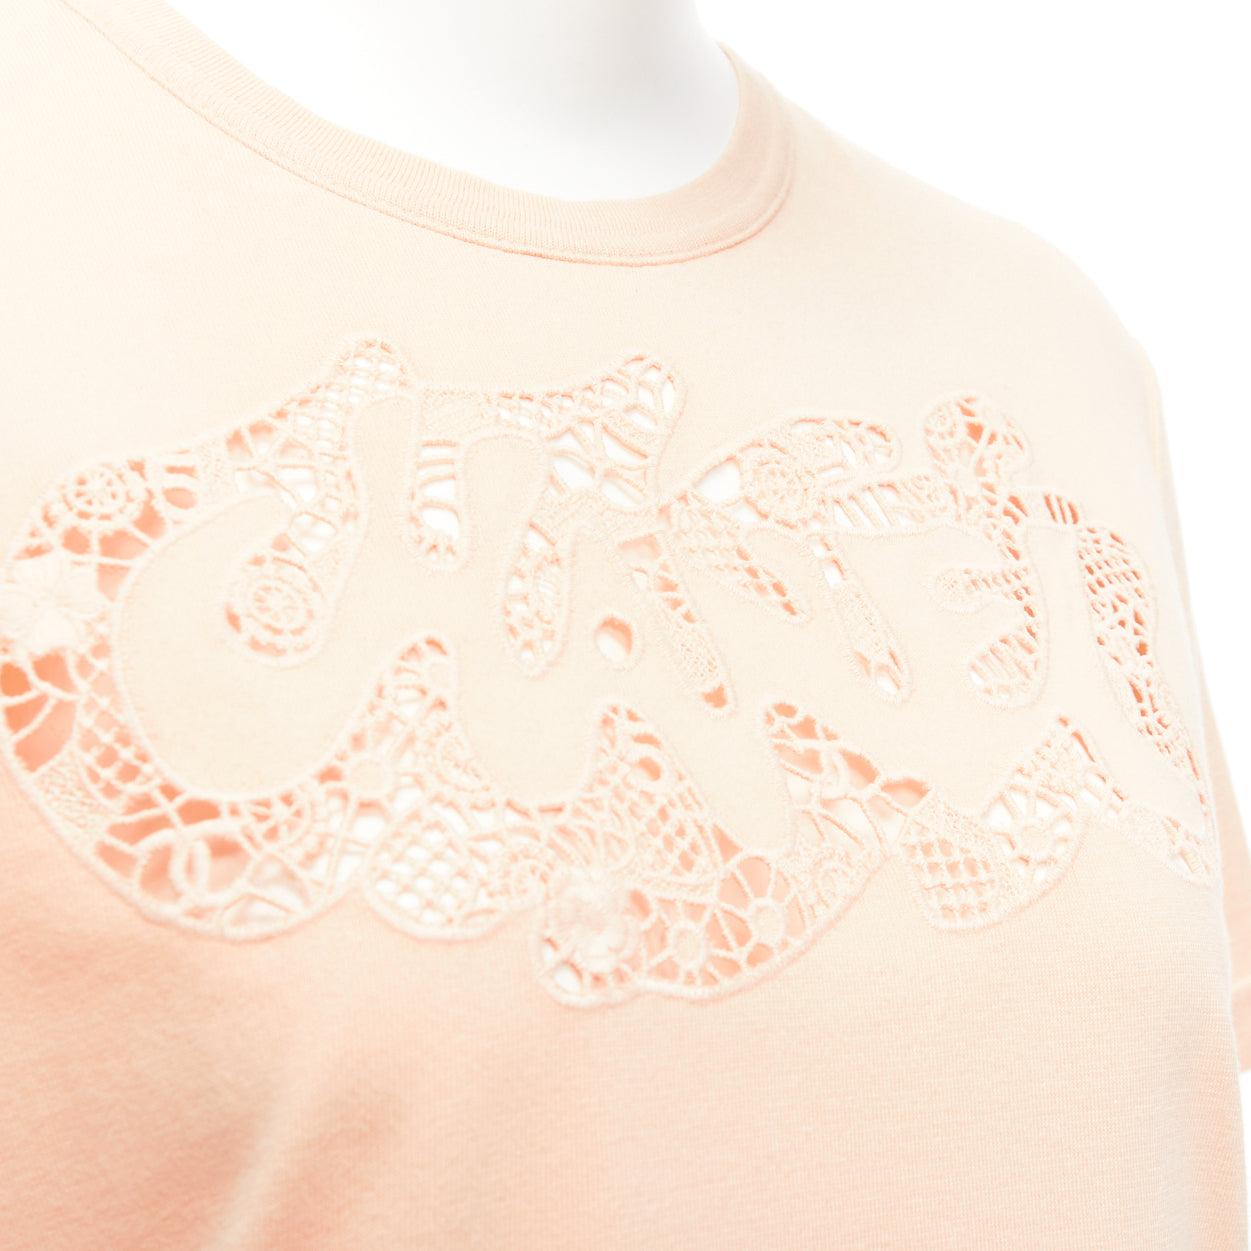 CHANEL 2020 peach pink macrame hollow logo cropped pocketed tshirt FR38 M
Reference: KYCG/A00004
Brand: Chanel
Designer: Virginie Viard
Material: Cotton
Color: Peach
Pattern: Logomania
Closure: Pullover
Extra Details: Macrame CHANEL logo at